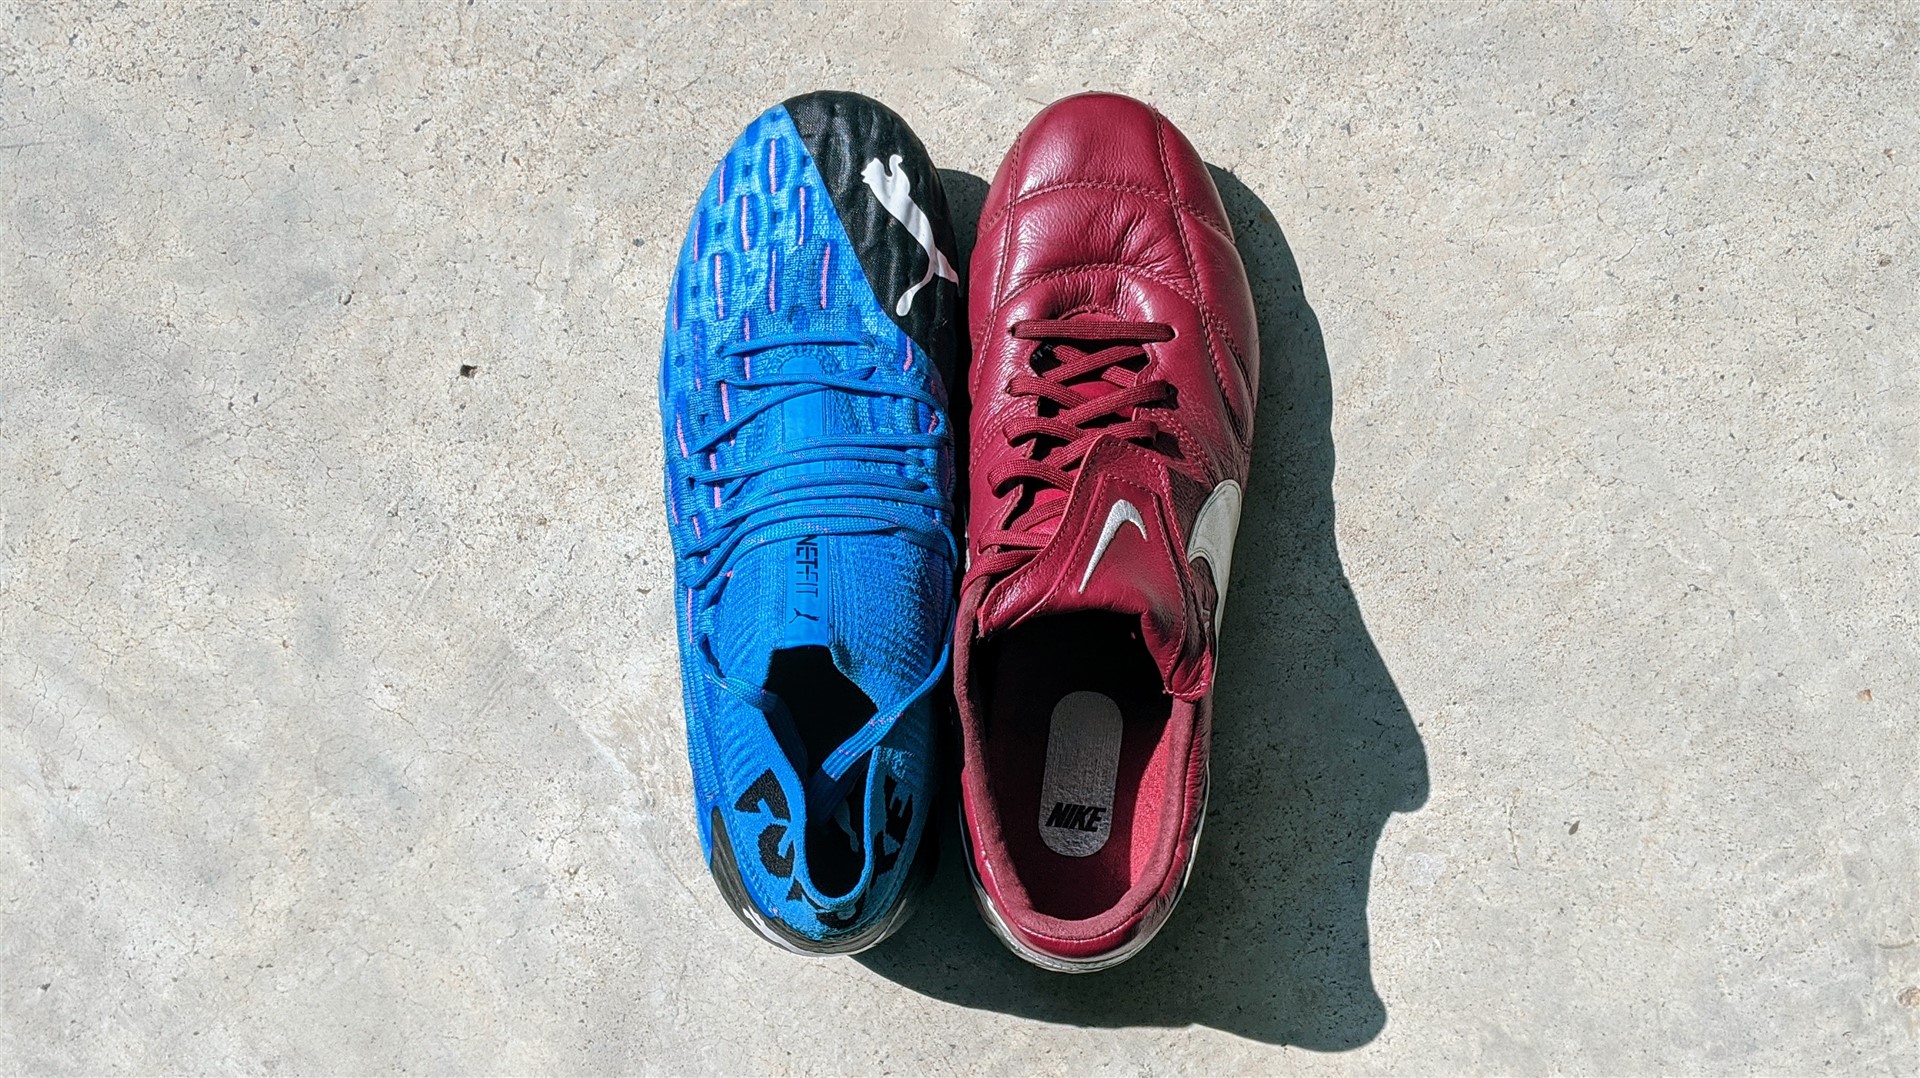 Best football boots for wide feet by 